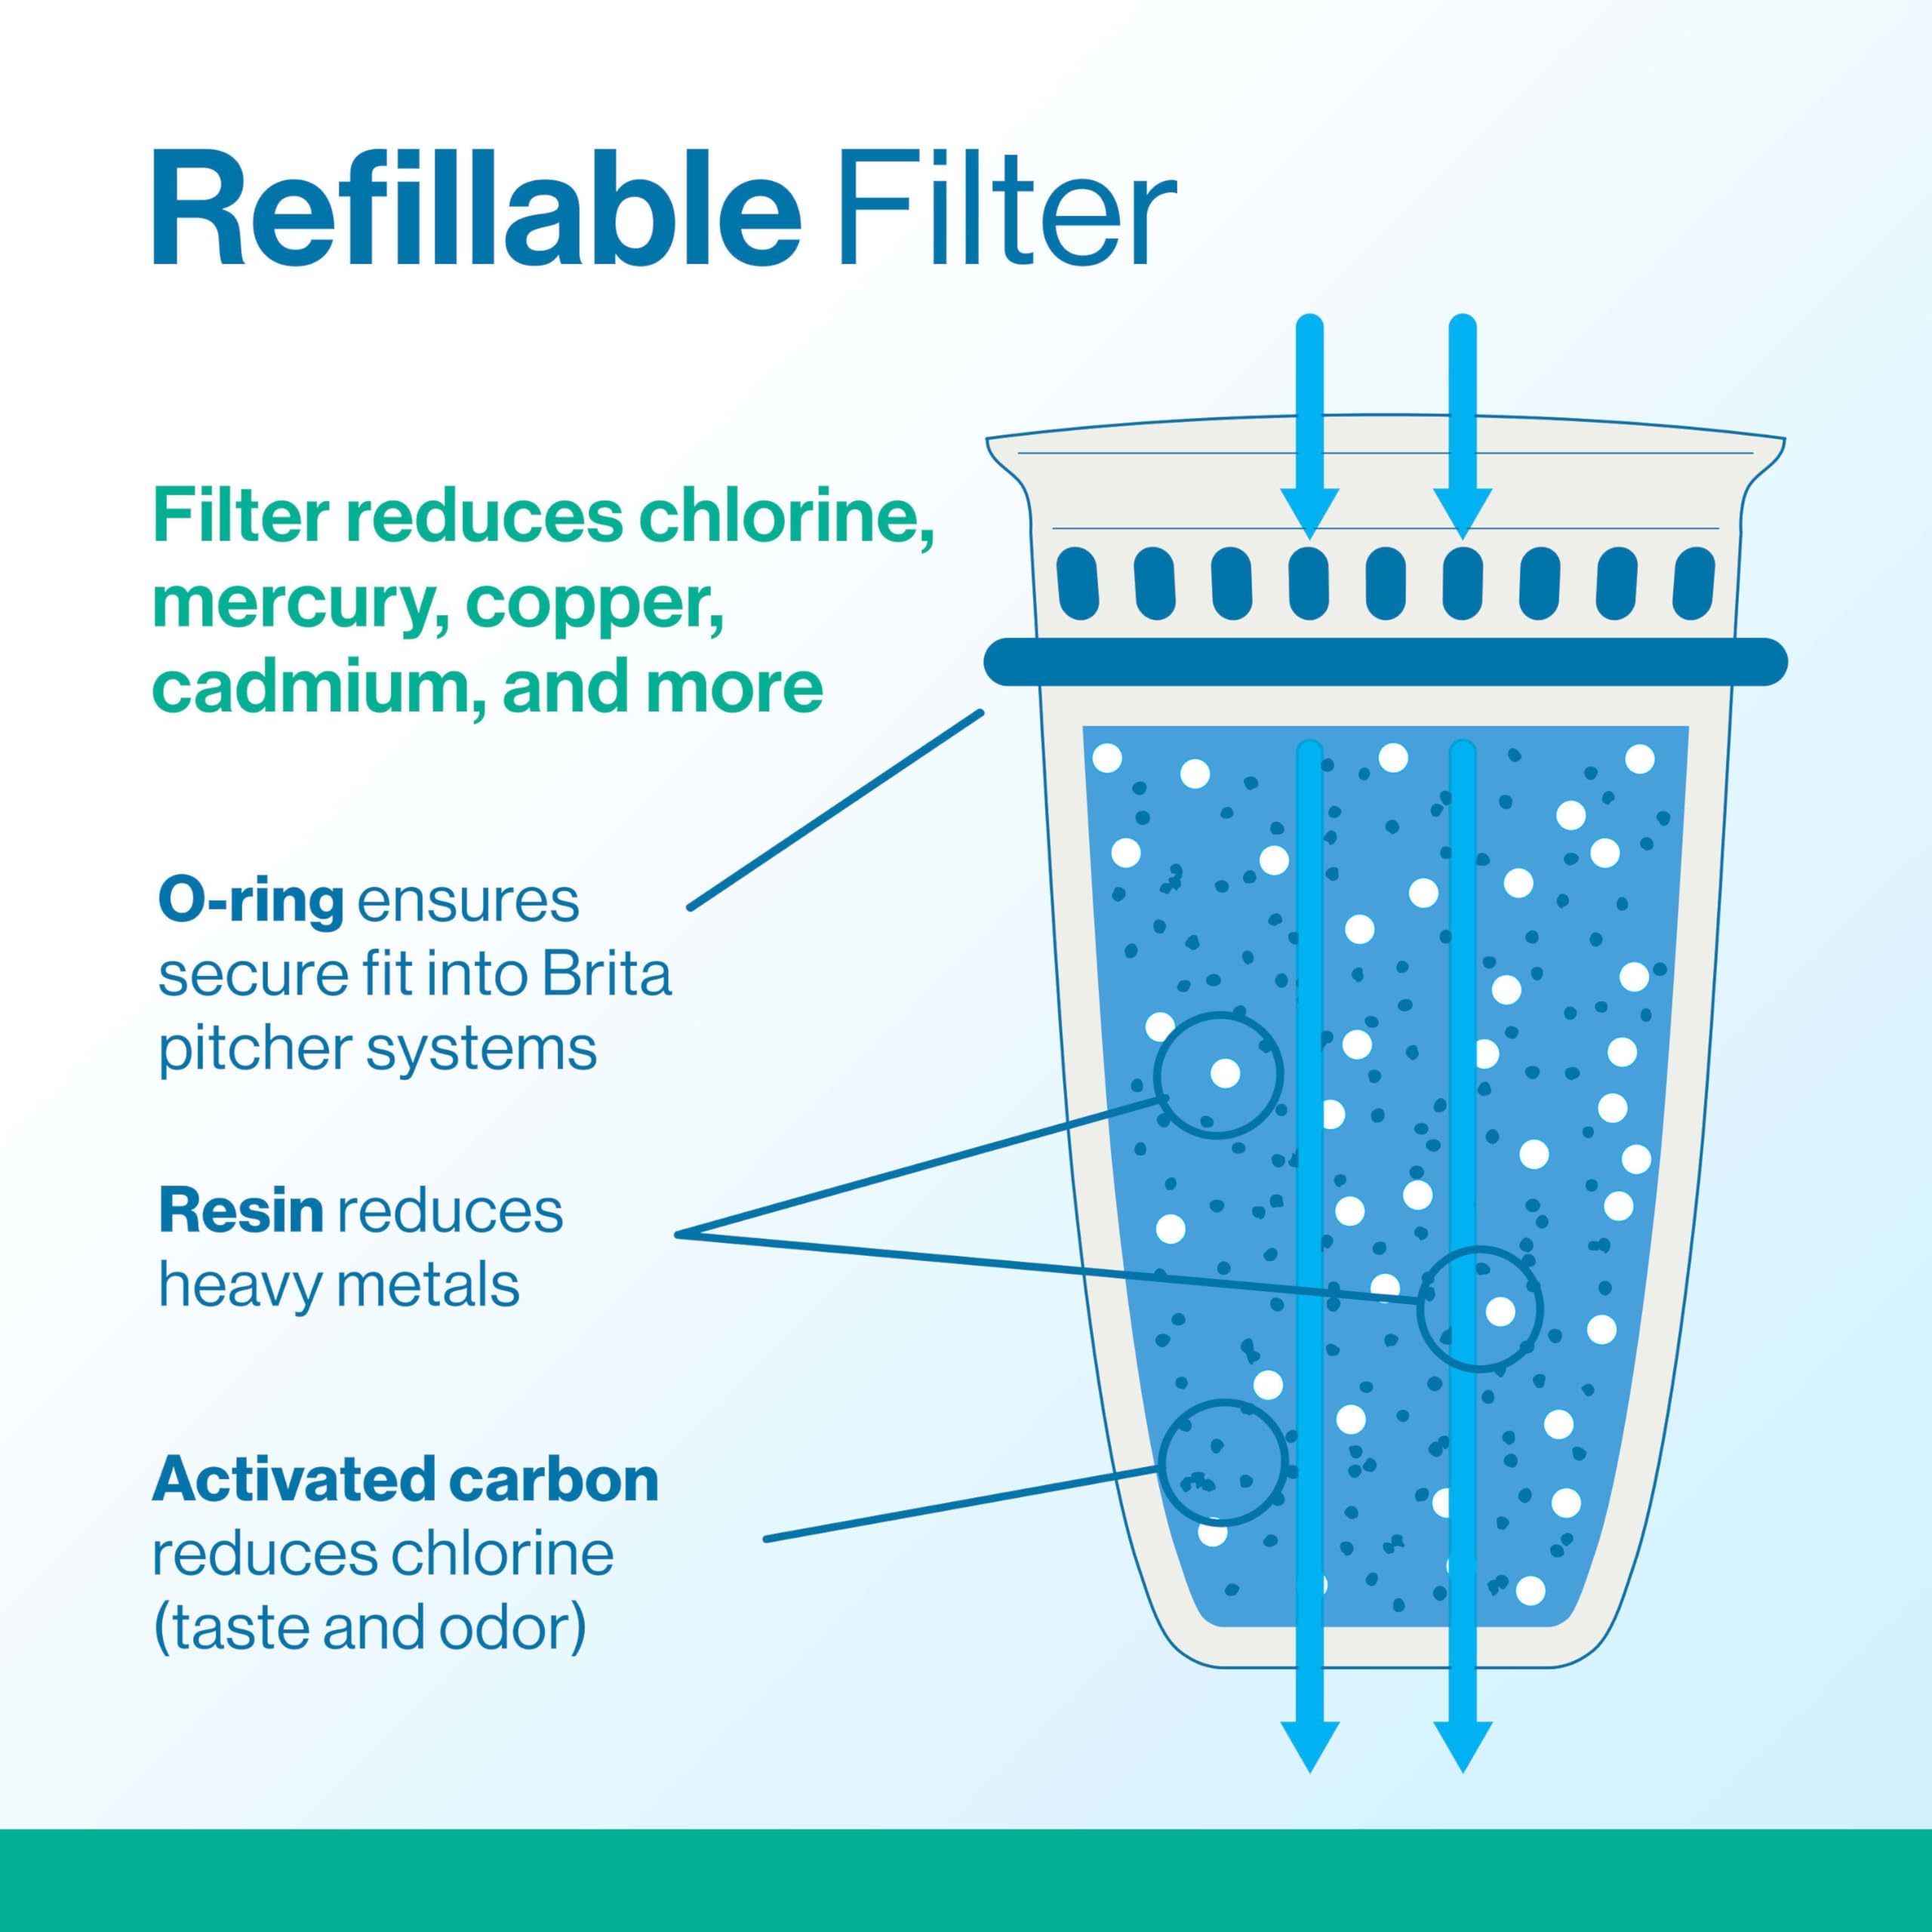 Brita NEW Refillable Filter Refill Packs for Pitchers and Dispensers, 80% Less Plastic*, Lasts 2 Months, 6 Count